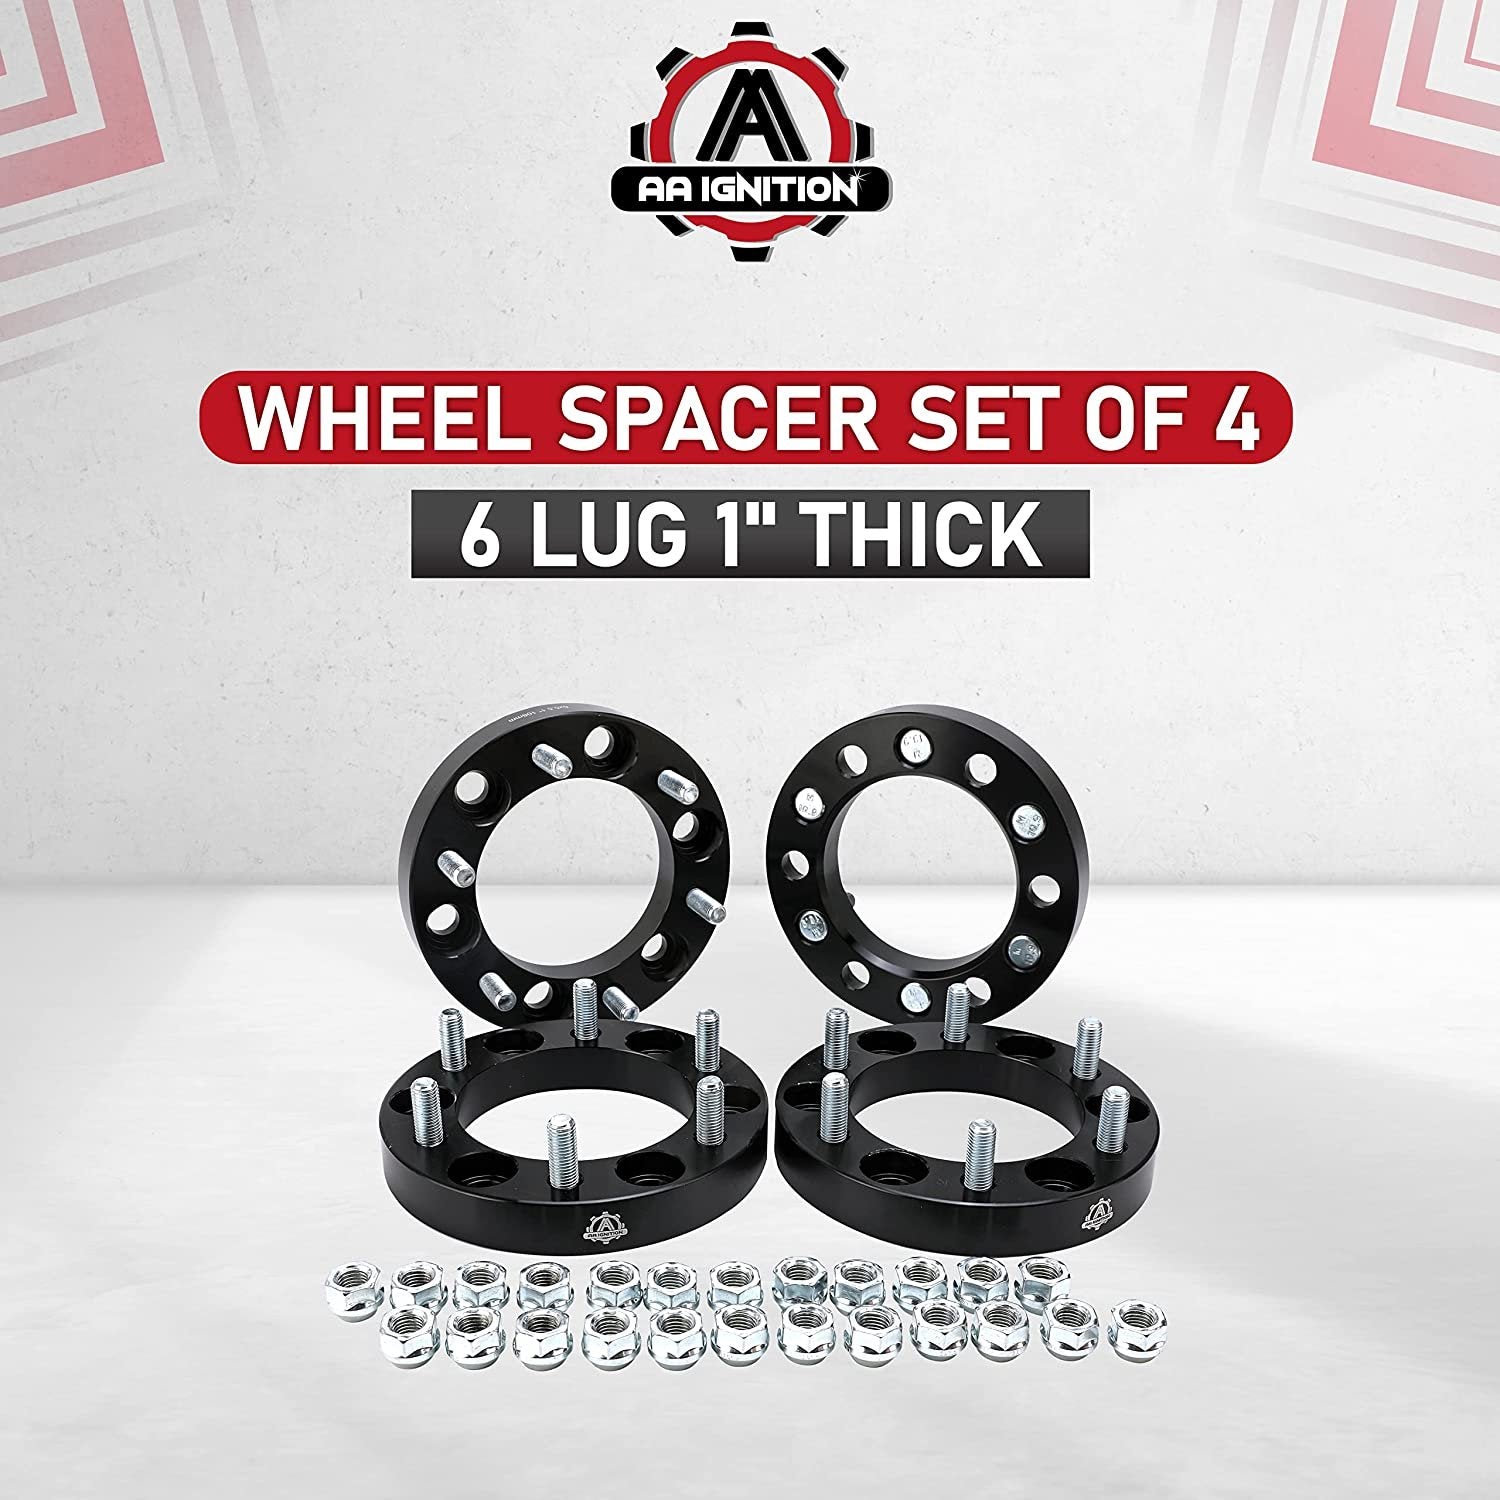 Wheel Spacer Set of 4-6 Lug 1 inch Thick 25mm Lug Centric Hub Adapter 6x5.5 - Compatible with Toyota Vehicles - 1996-2018 4Runner, 01-07 Sequoia, 2001-18 Tacoma, Tundra, FJ Cruiser - 6x139.7mm